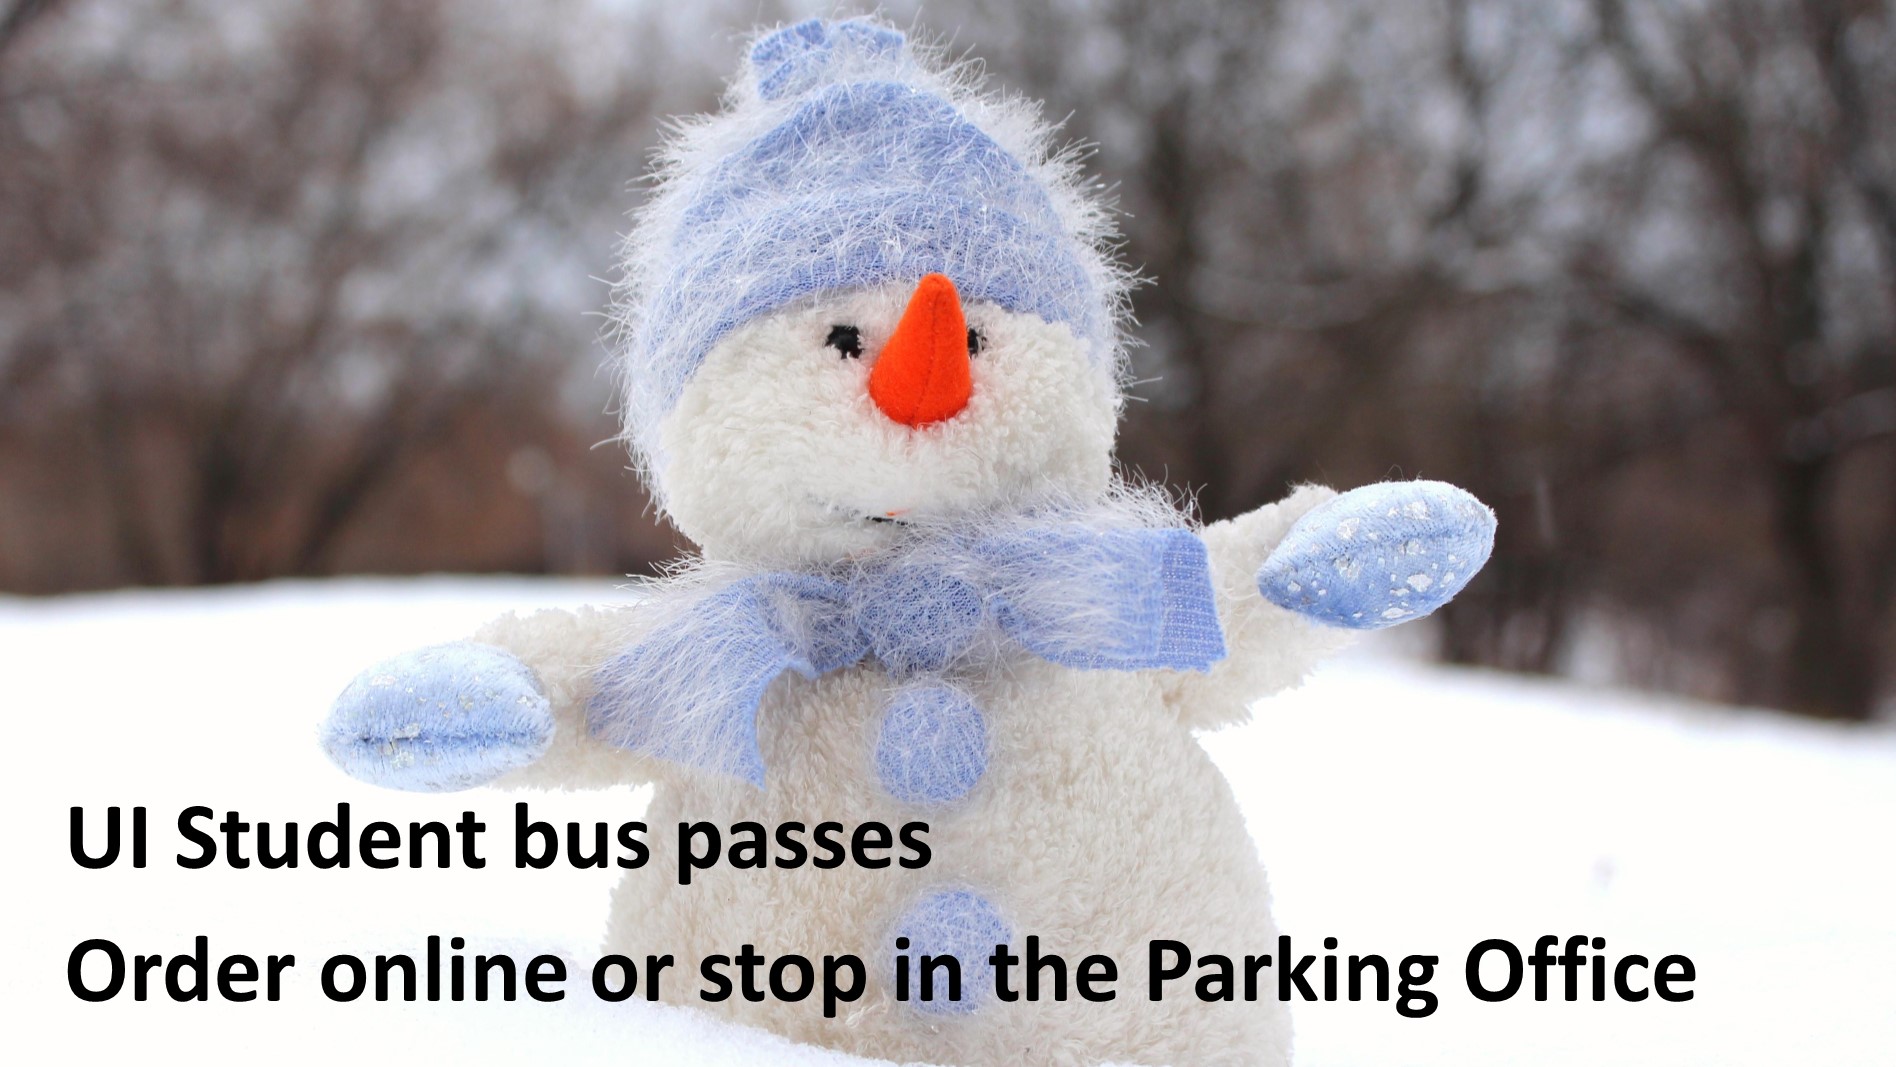 Student bus passes online at Parking